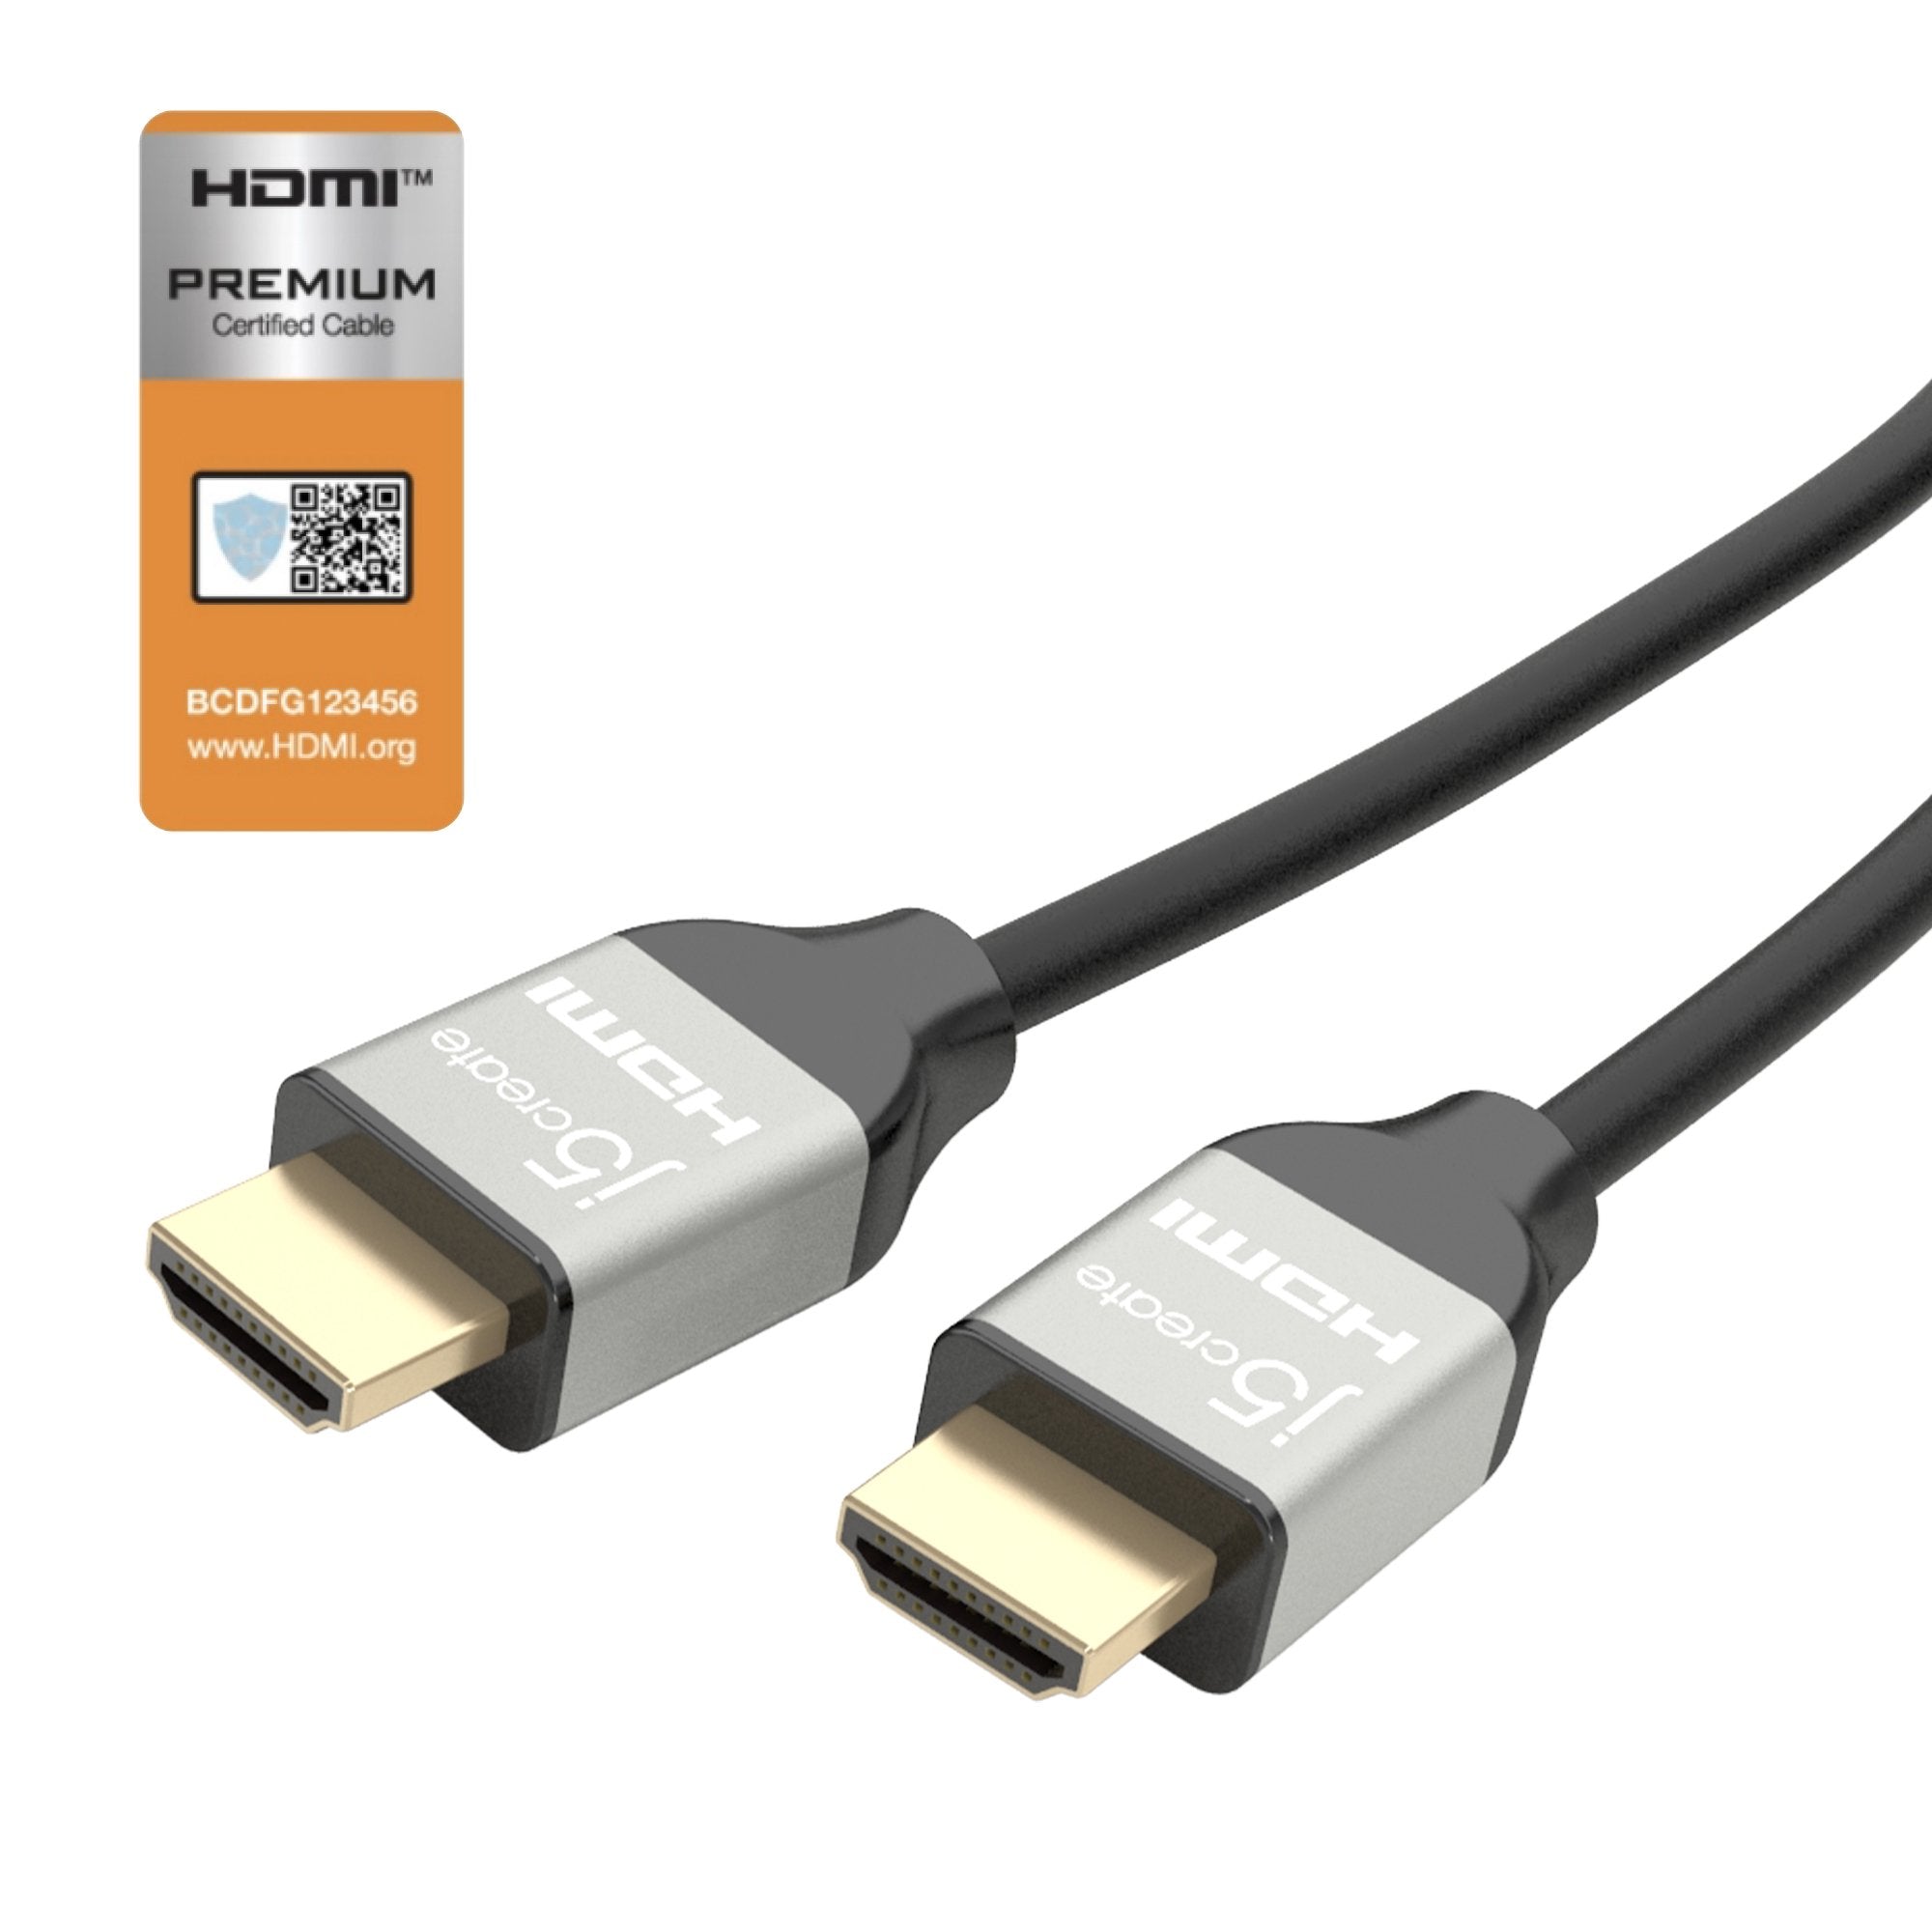 J&D Ultra High Speed HDMI 2.1 Cable, Gold Plated 2.1 Version HDMI